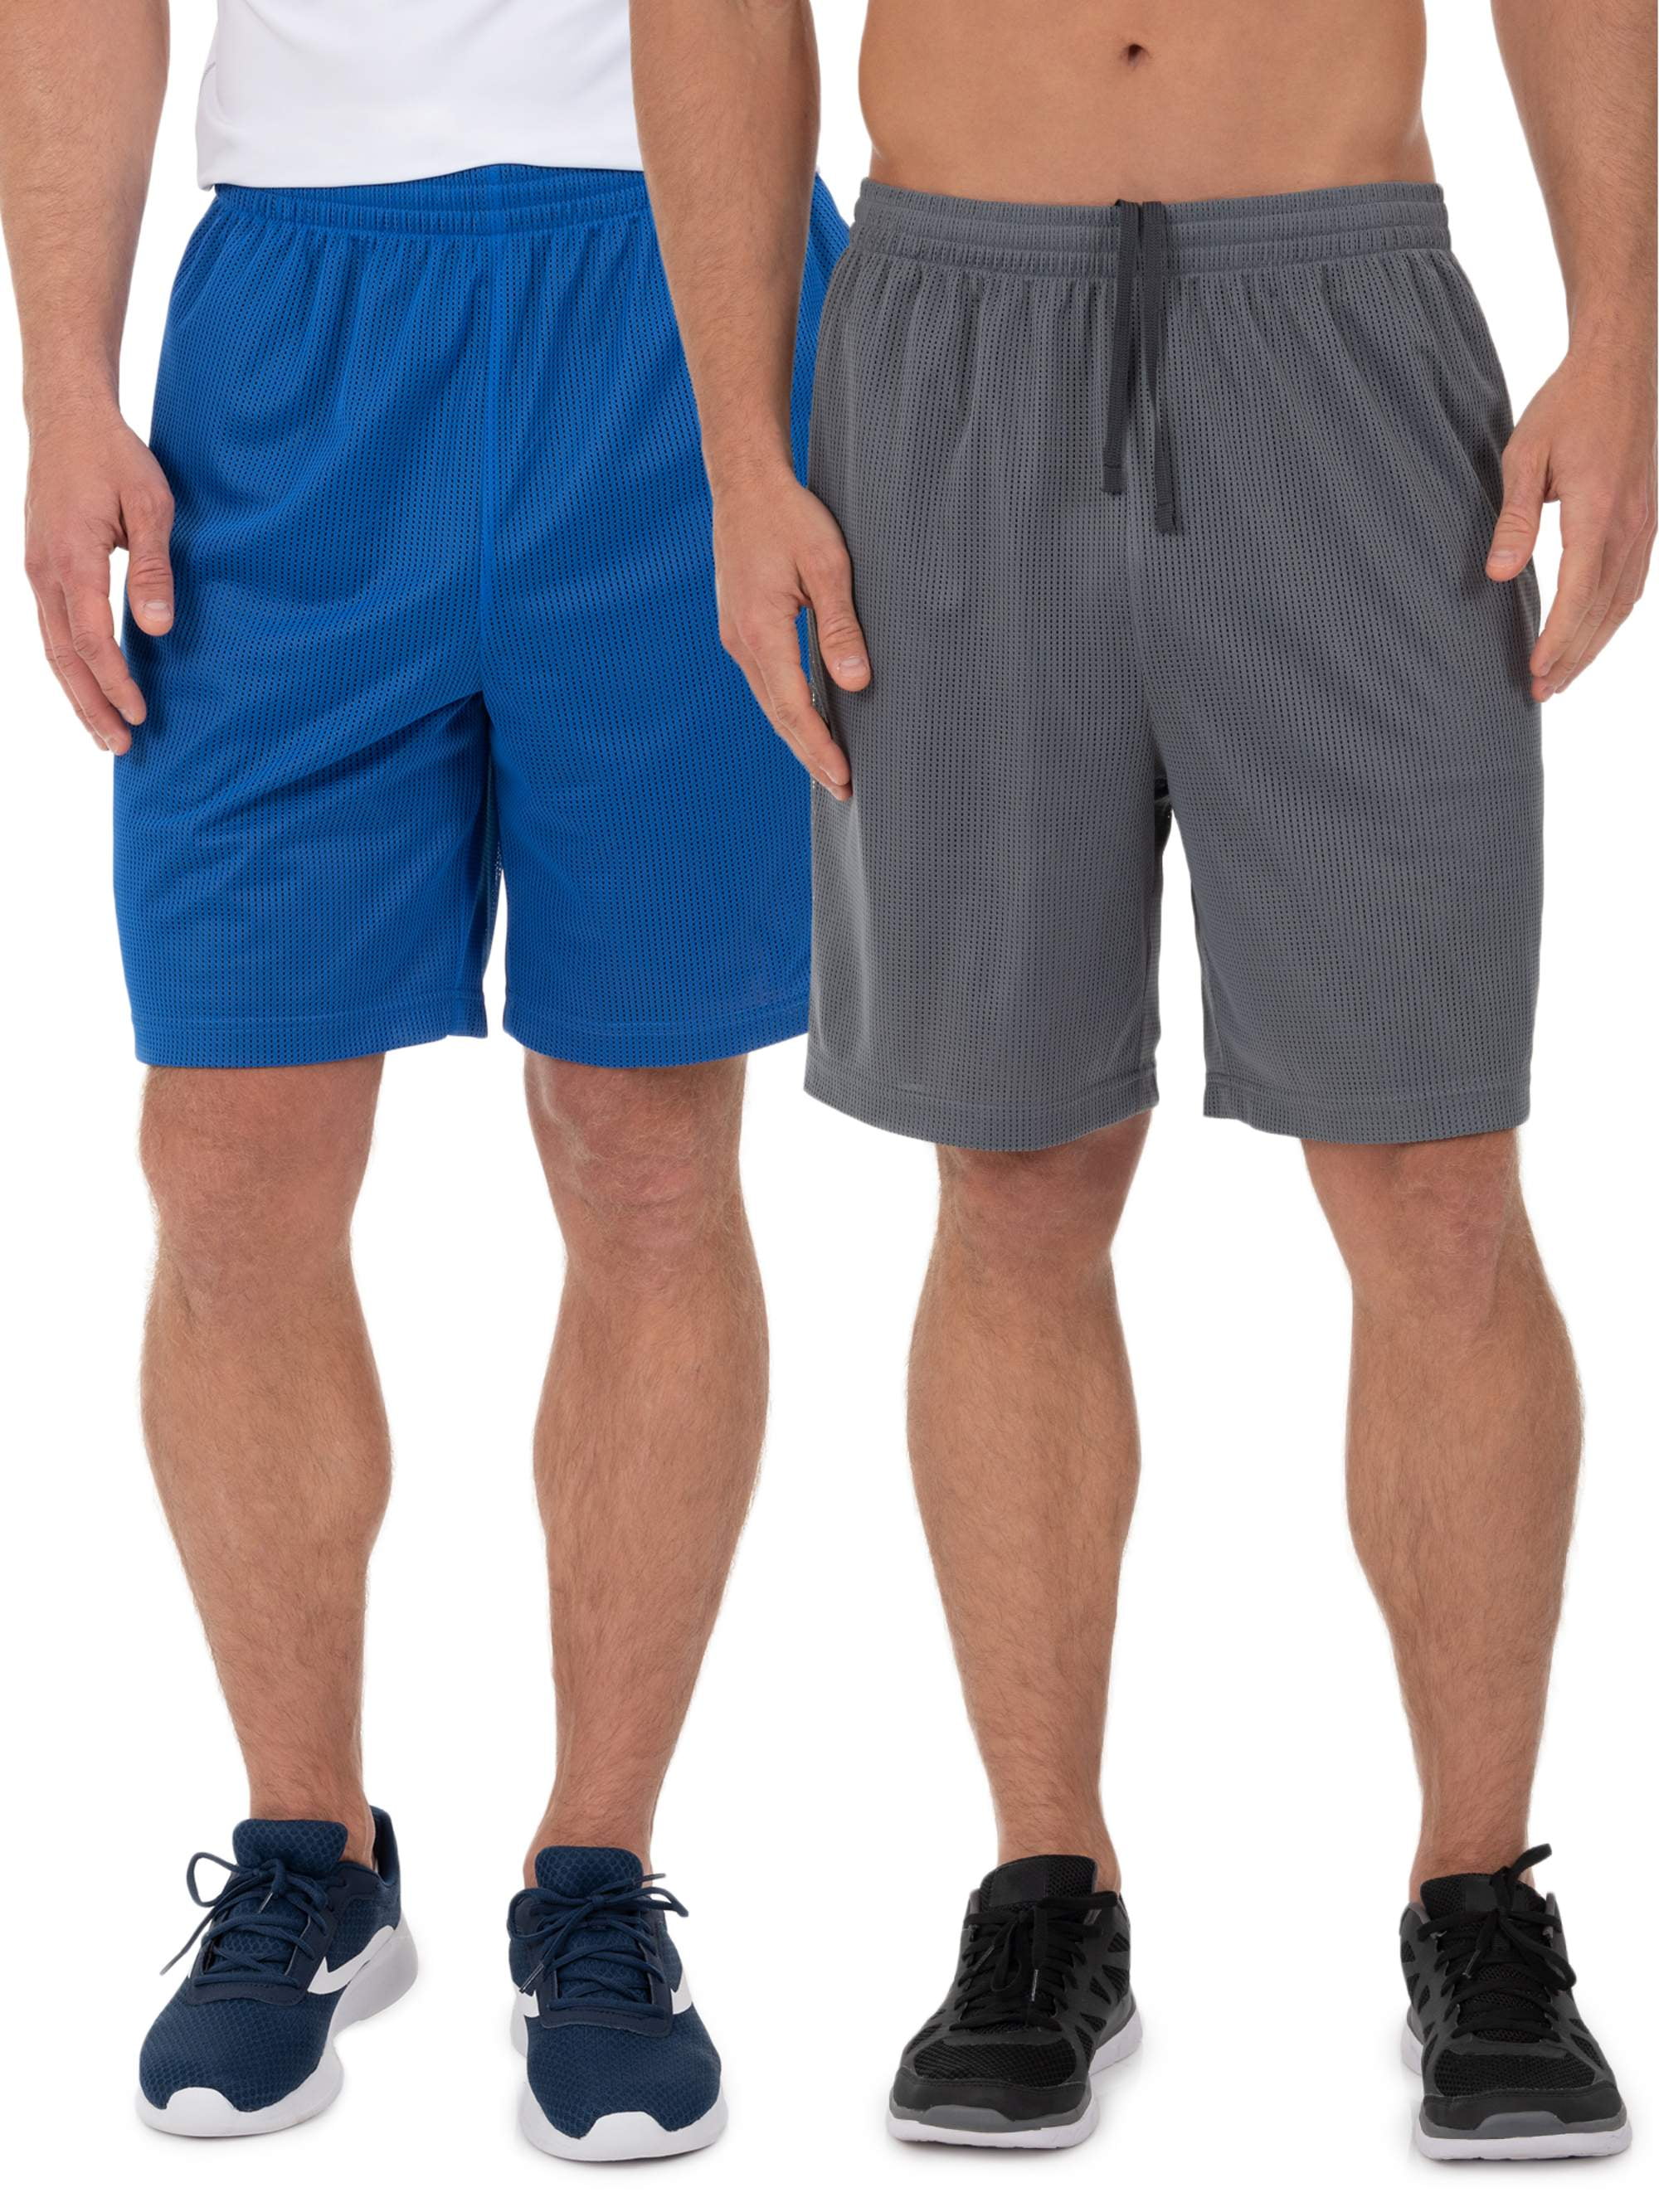 PTSports Men’s 12 Cool Basketball Shorts with Pockets Quick-Dry Athletic Running Gym Shorts Drawstring 